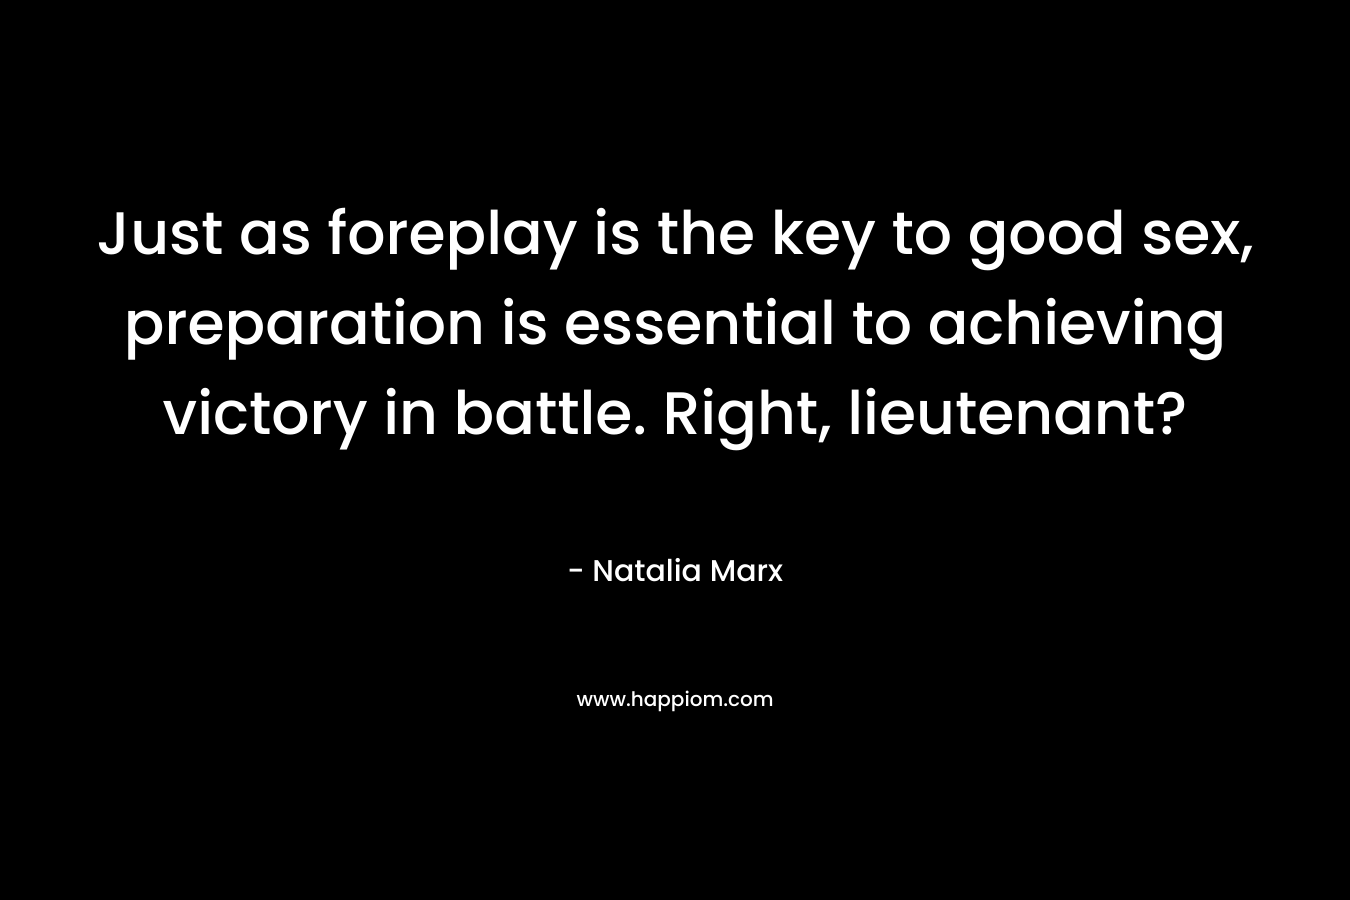 Just as foreplay is the key to good sex, preparation is essential to achieving victory in battle. Right, lieutenant? – Natalia Marx